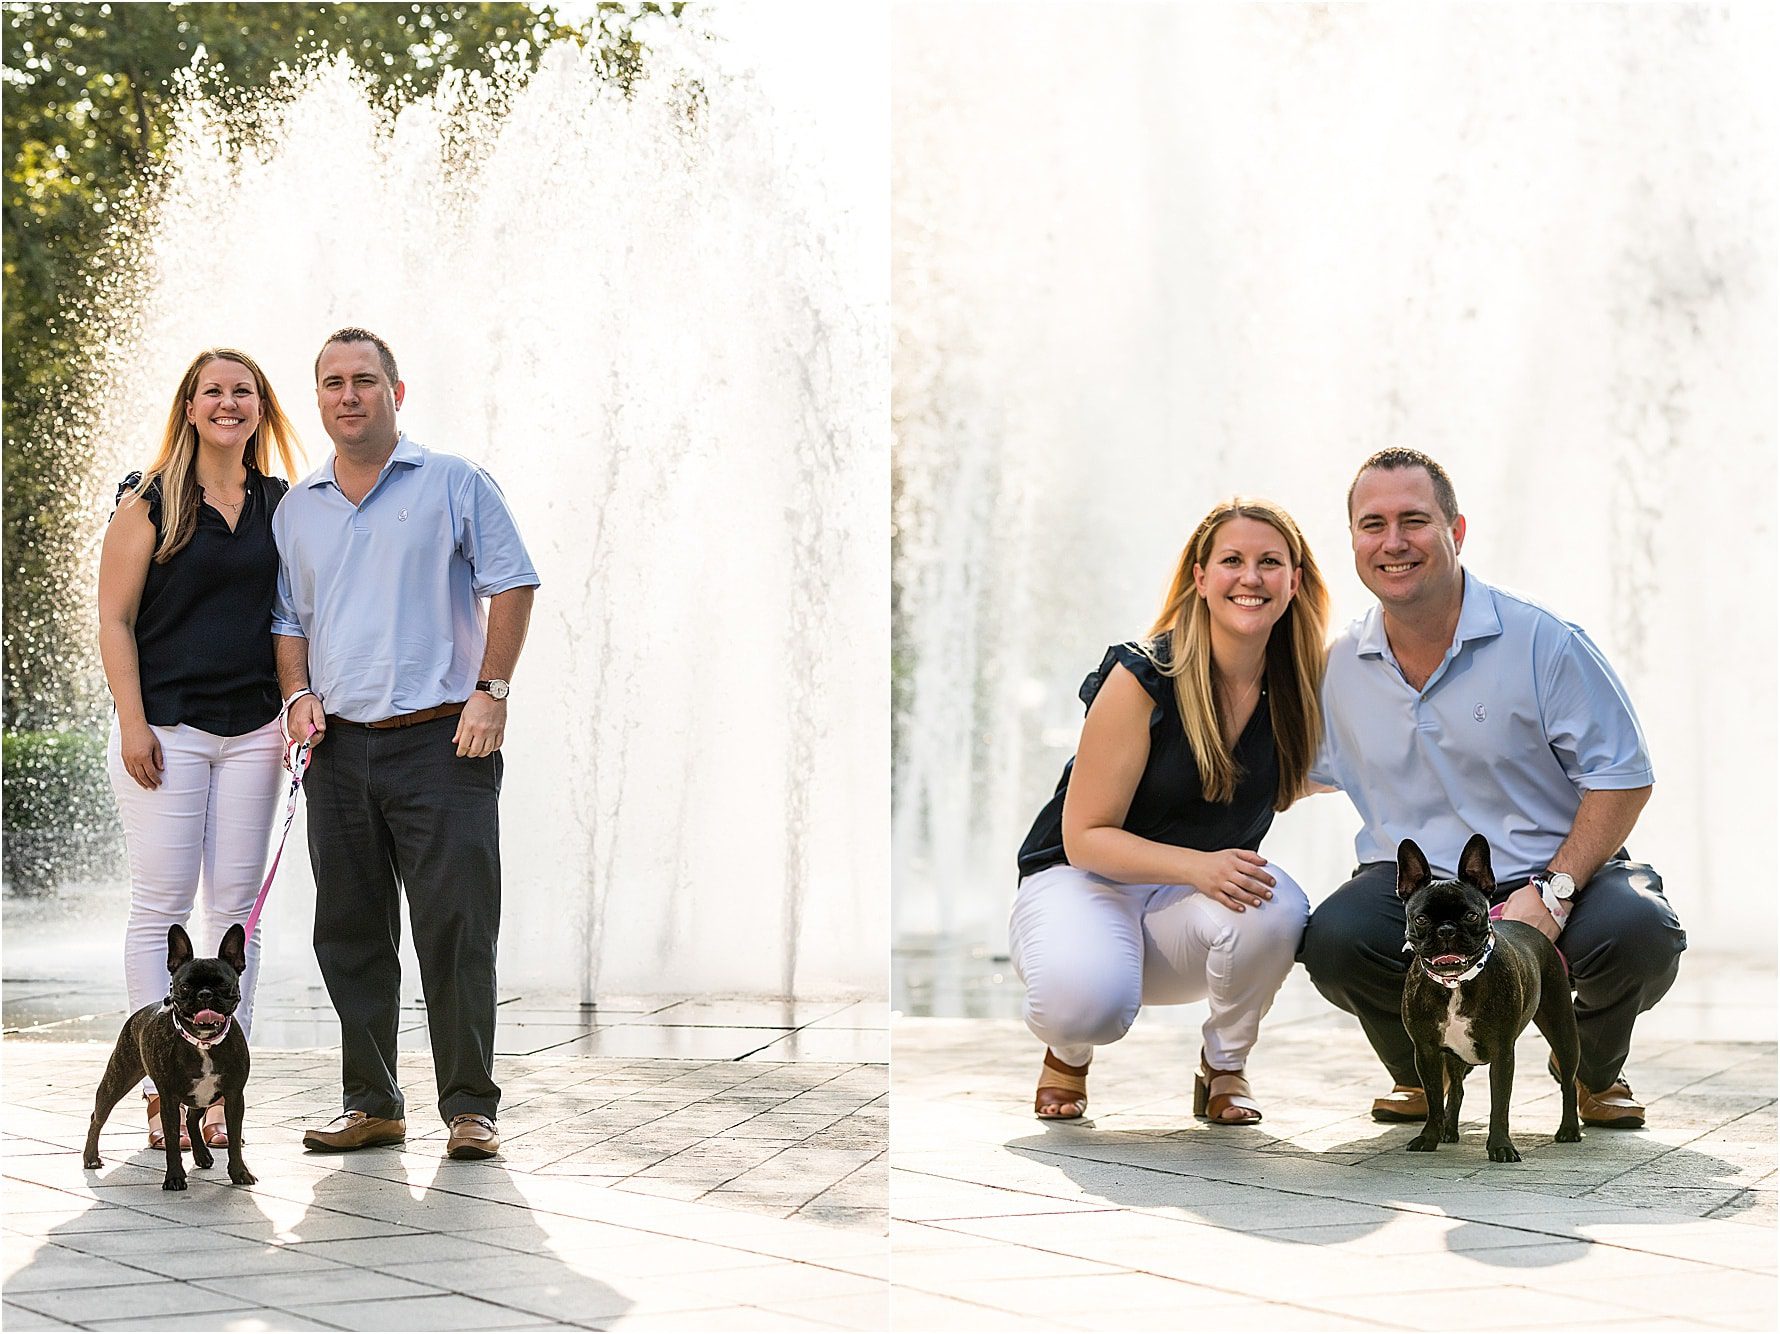 Collage of bride and groom smiling and posing with their dog for their engagement session with fountains of water sprouting up behind them